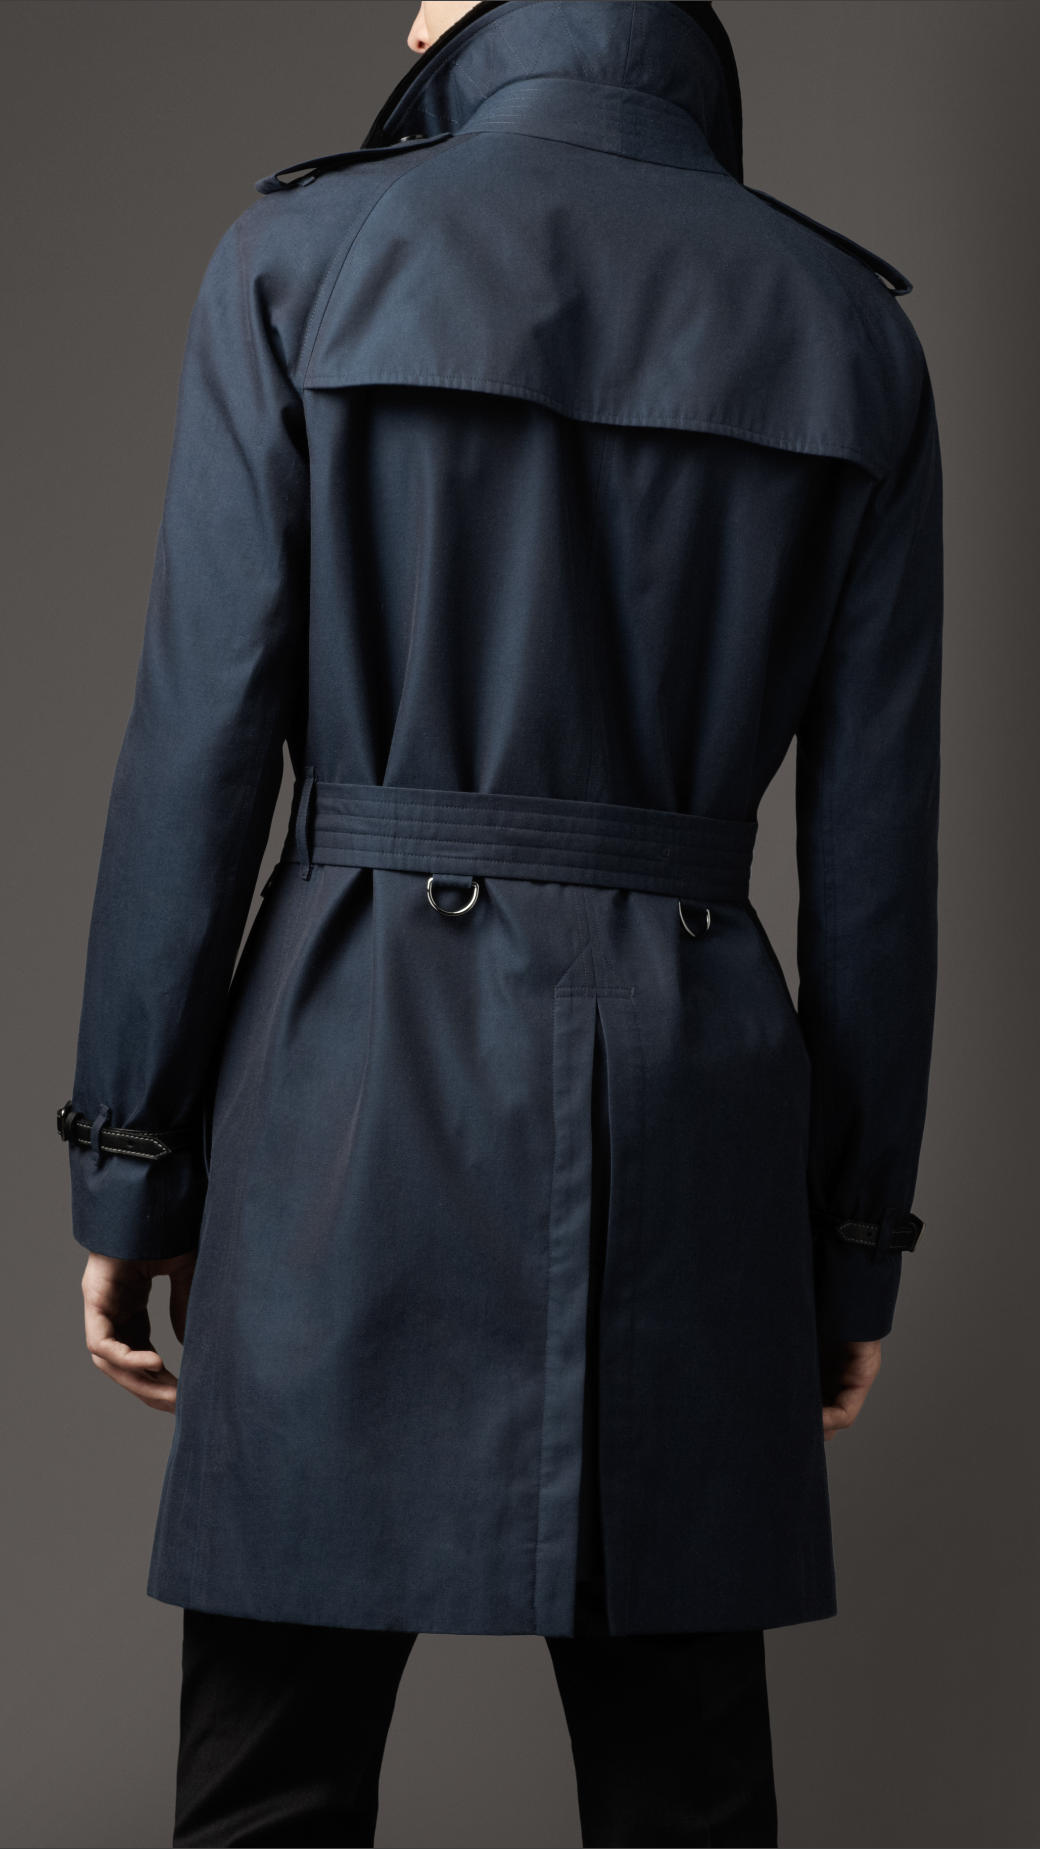 Lyst - Burberry Midlength Cotton Gabardine Leather Trim Trench Coat in ...